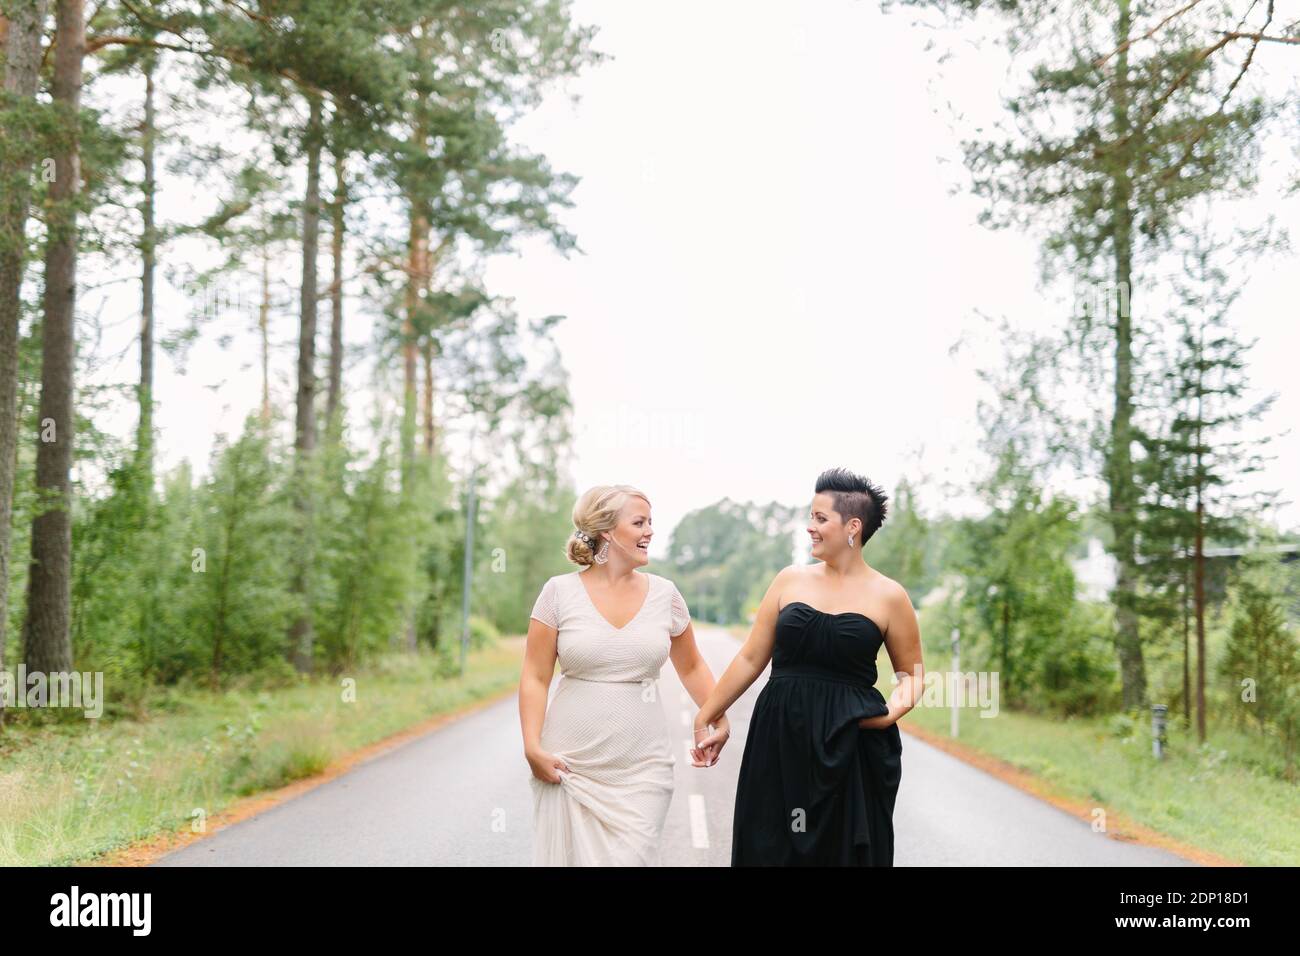 Brides in wedding dresses walking together Stock Photo